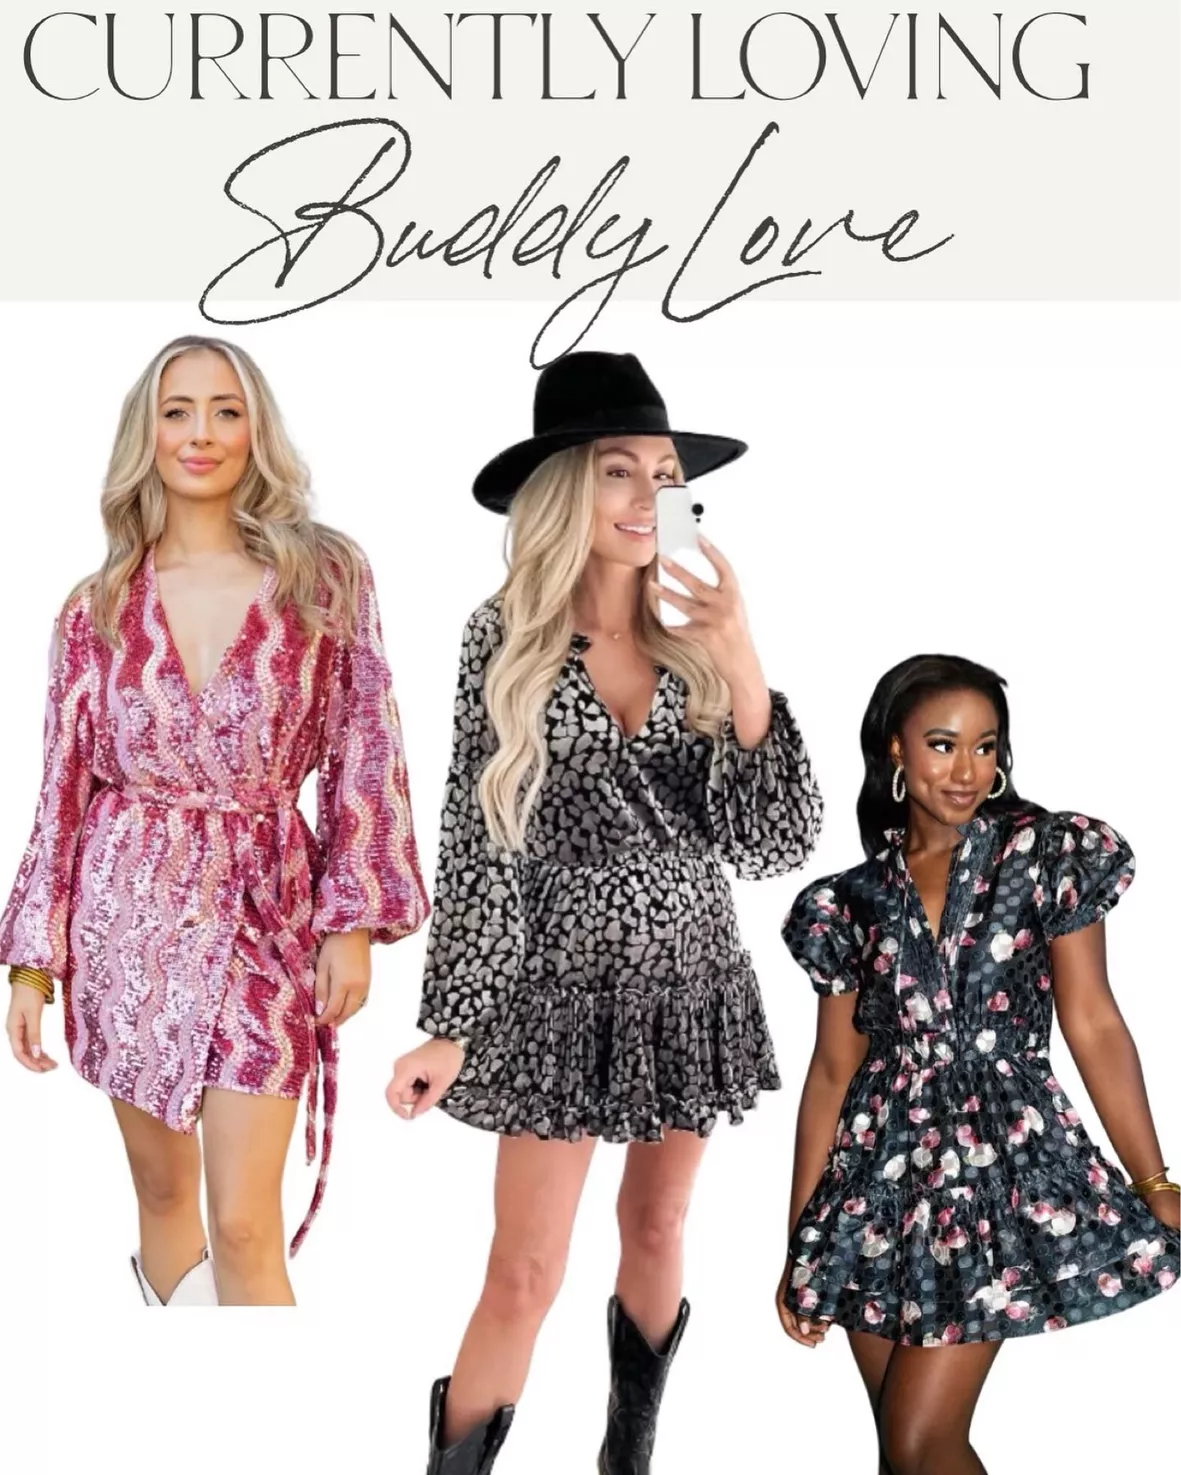 BuddyLove curated on LTK